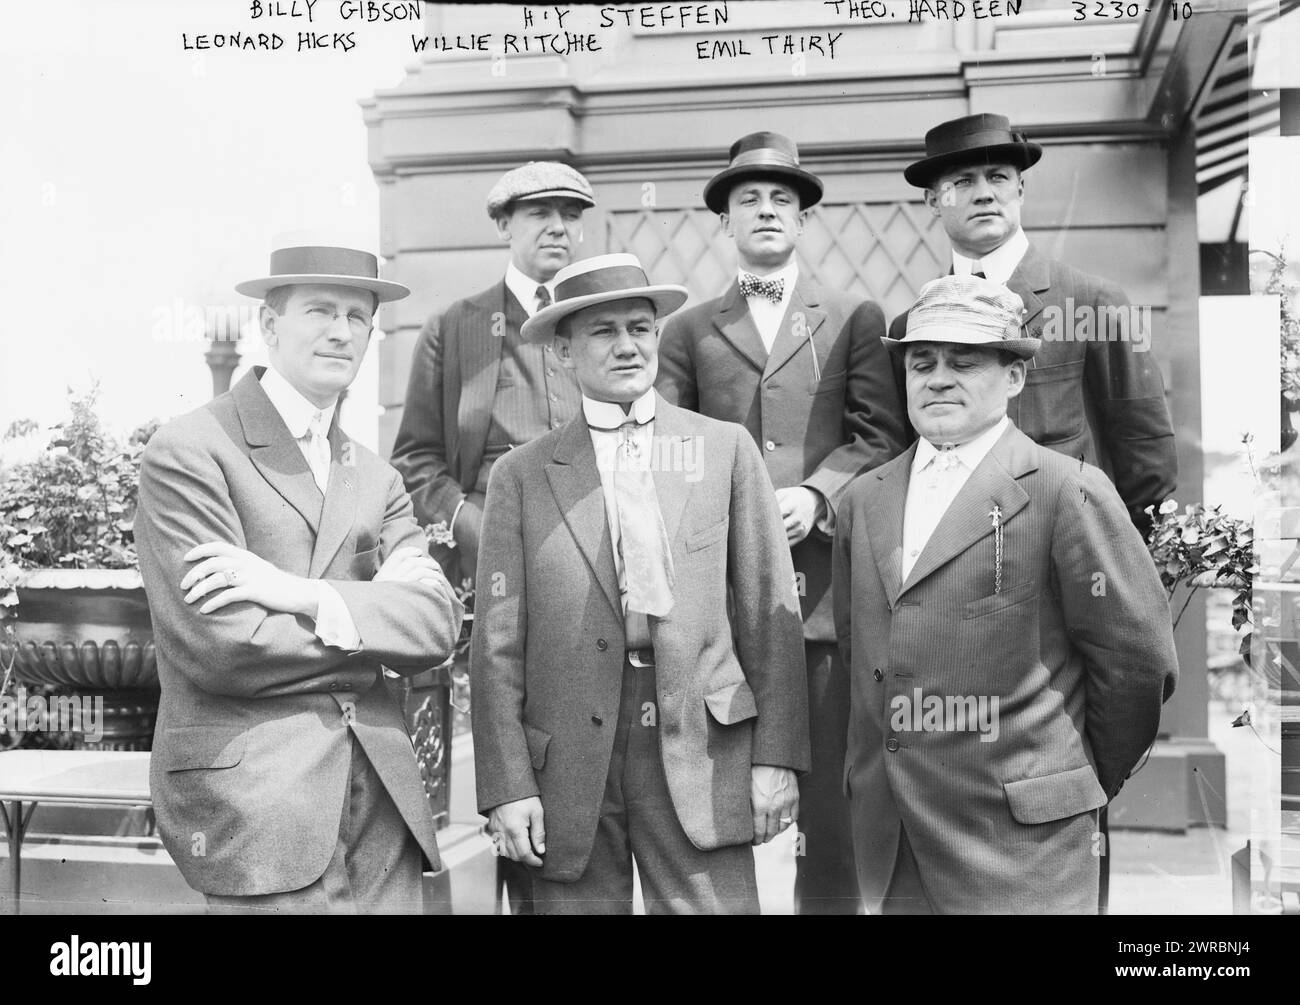 Billy Gibson, H.Y. Steffen, Theo. Hardeen, Leonard Hicks, Willie Ritchie, Emil Thiry, Photo shows Willie Richie (born Gerhardt Anthony Steffen) who was the world lightweight boxing champion from 1912 to 1914. In 1914 he sailed to London to face British lightweight champion Freddie Welsh. Also in photograph is Hungarian magician Theodore Hardeen, the brother of Harry Houdini., between ca. 1910 and ca. 1915, Glass negatives, 1 negative: glass Stock Photo